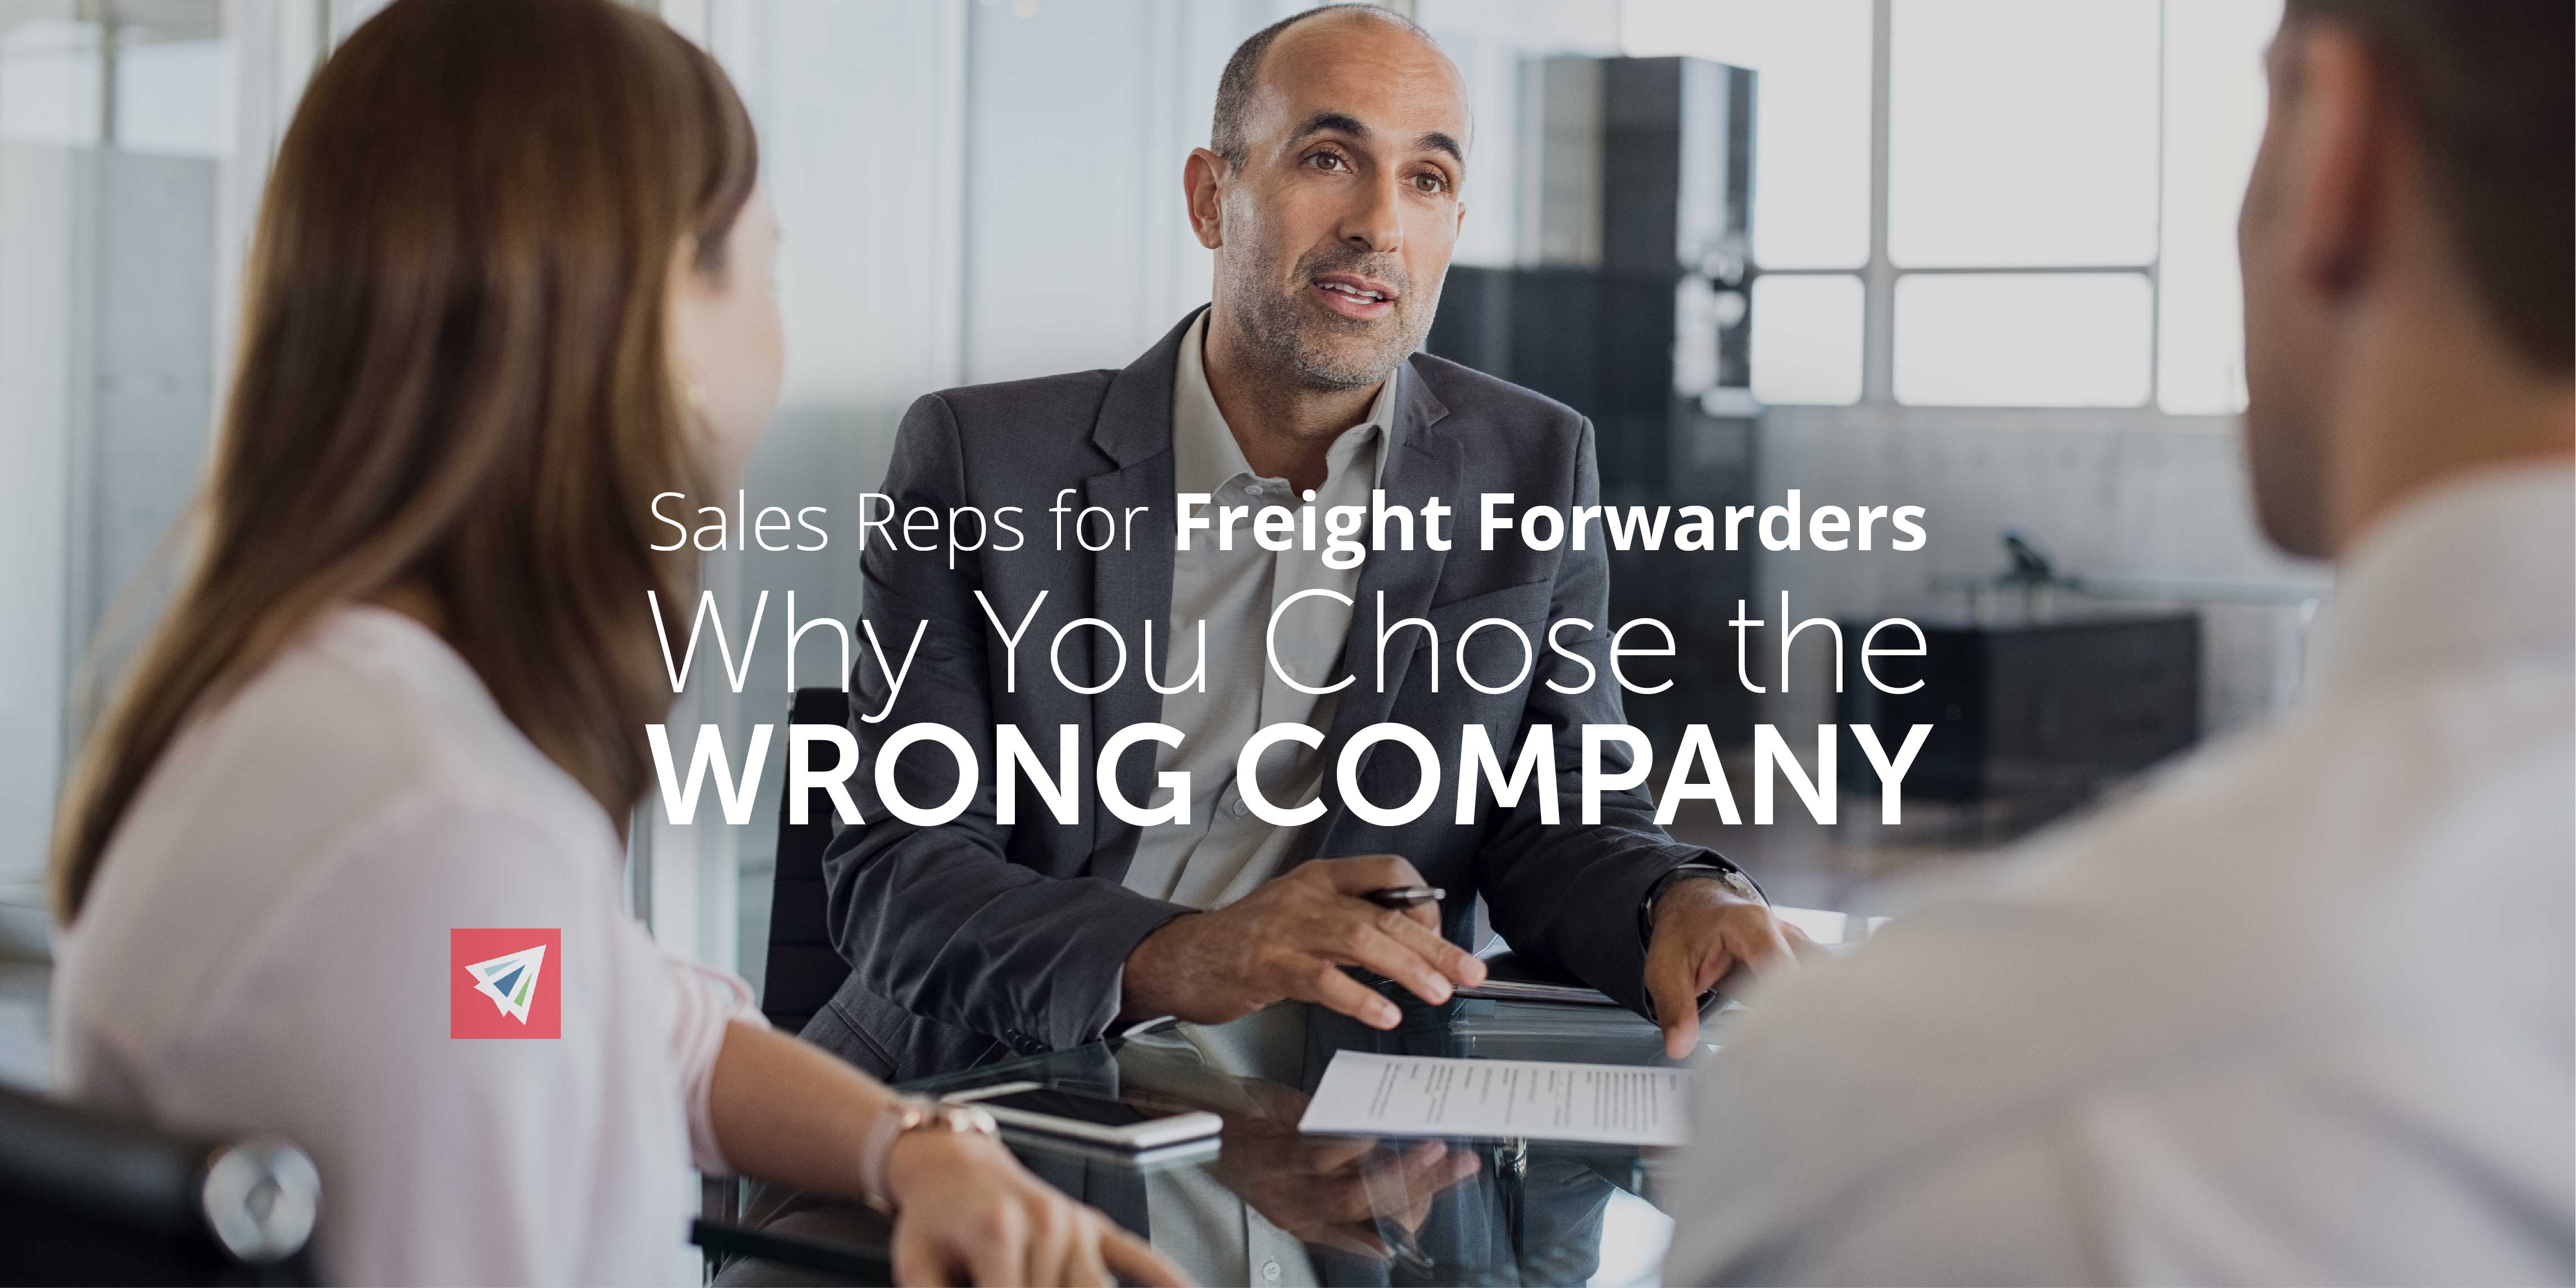 Sales Reps for Freight Forwarders Why You Chose the Wrong Company